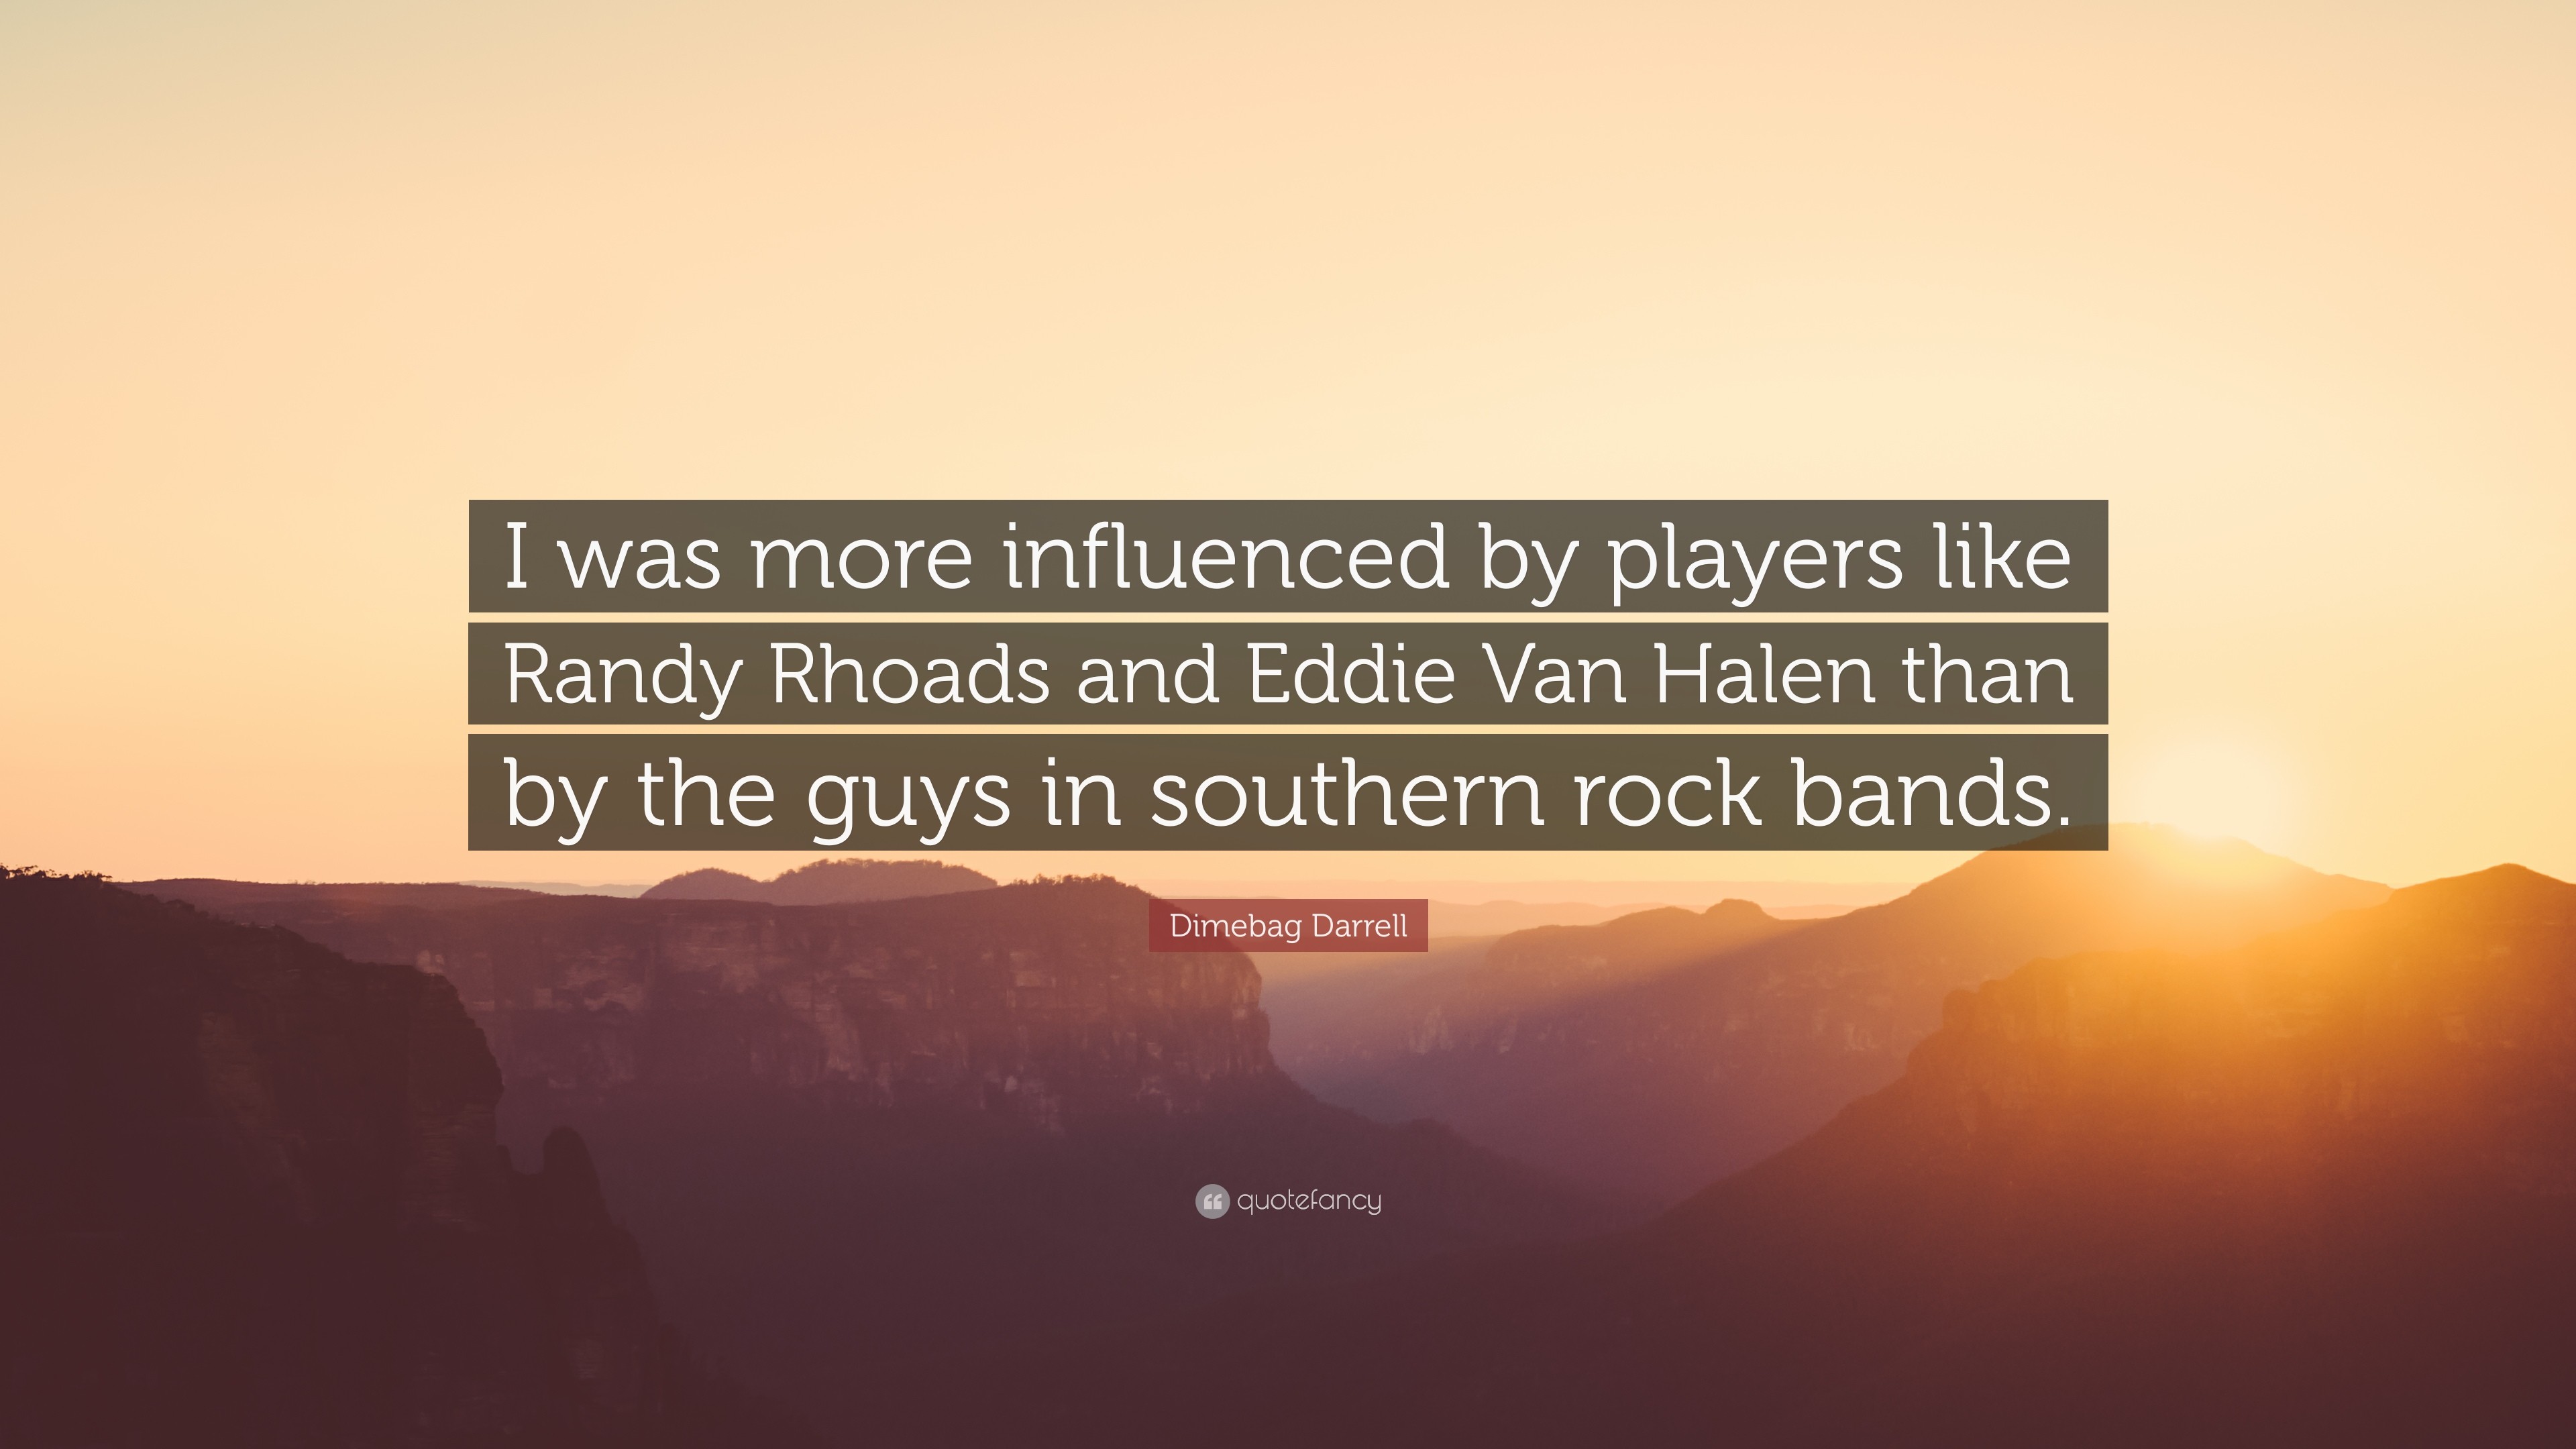 3840x2160 Dimebag Darrell Quote: “I was more influenced by players like Randy Rhoads  and Eddie